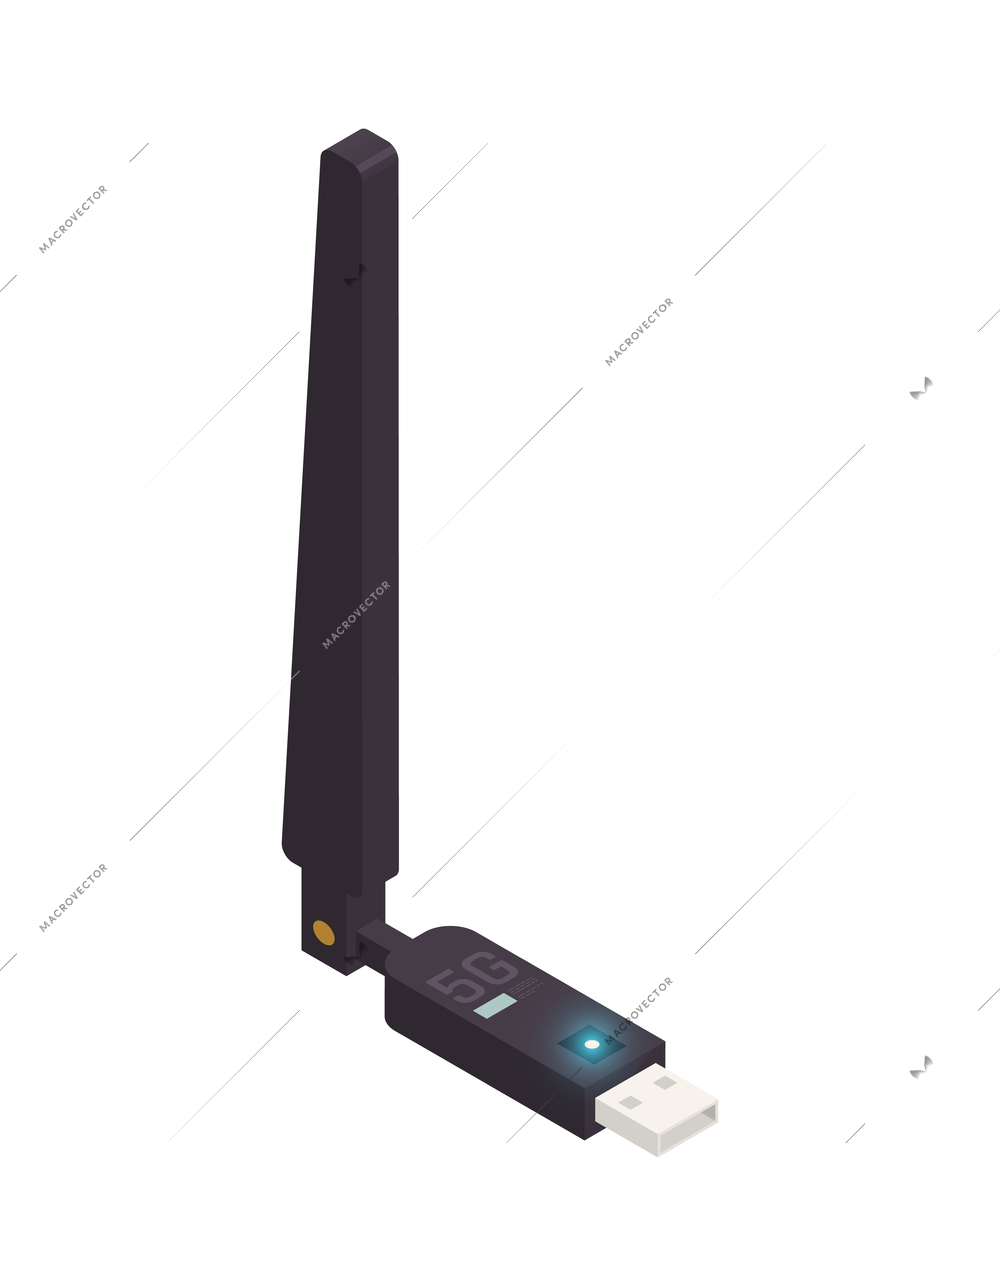 Modern 5g communication technology icon with isometric wireless internet usb adapter vector illustration